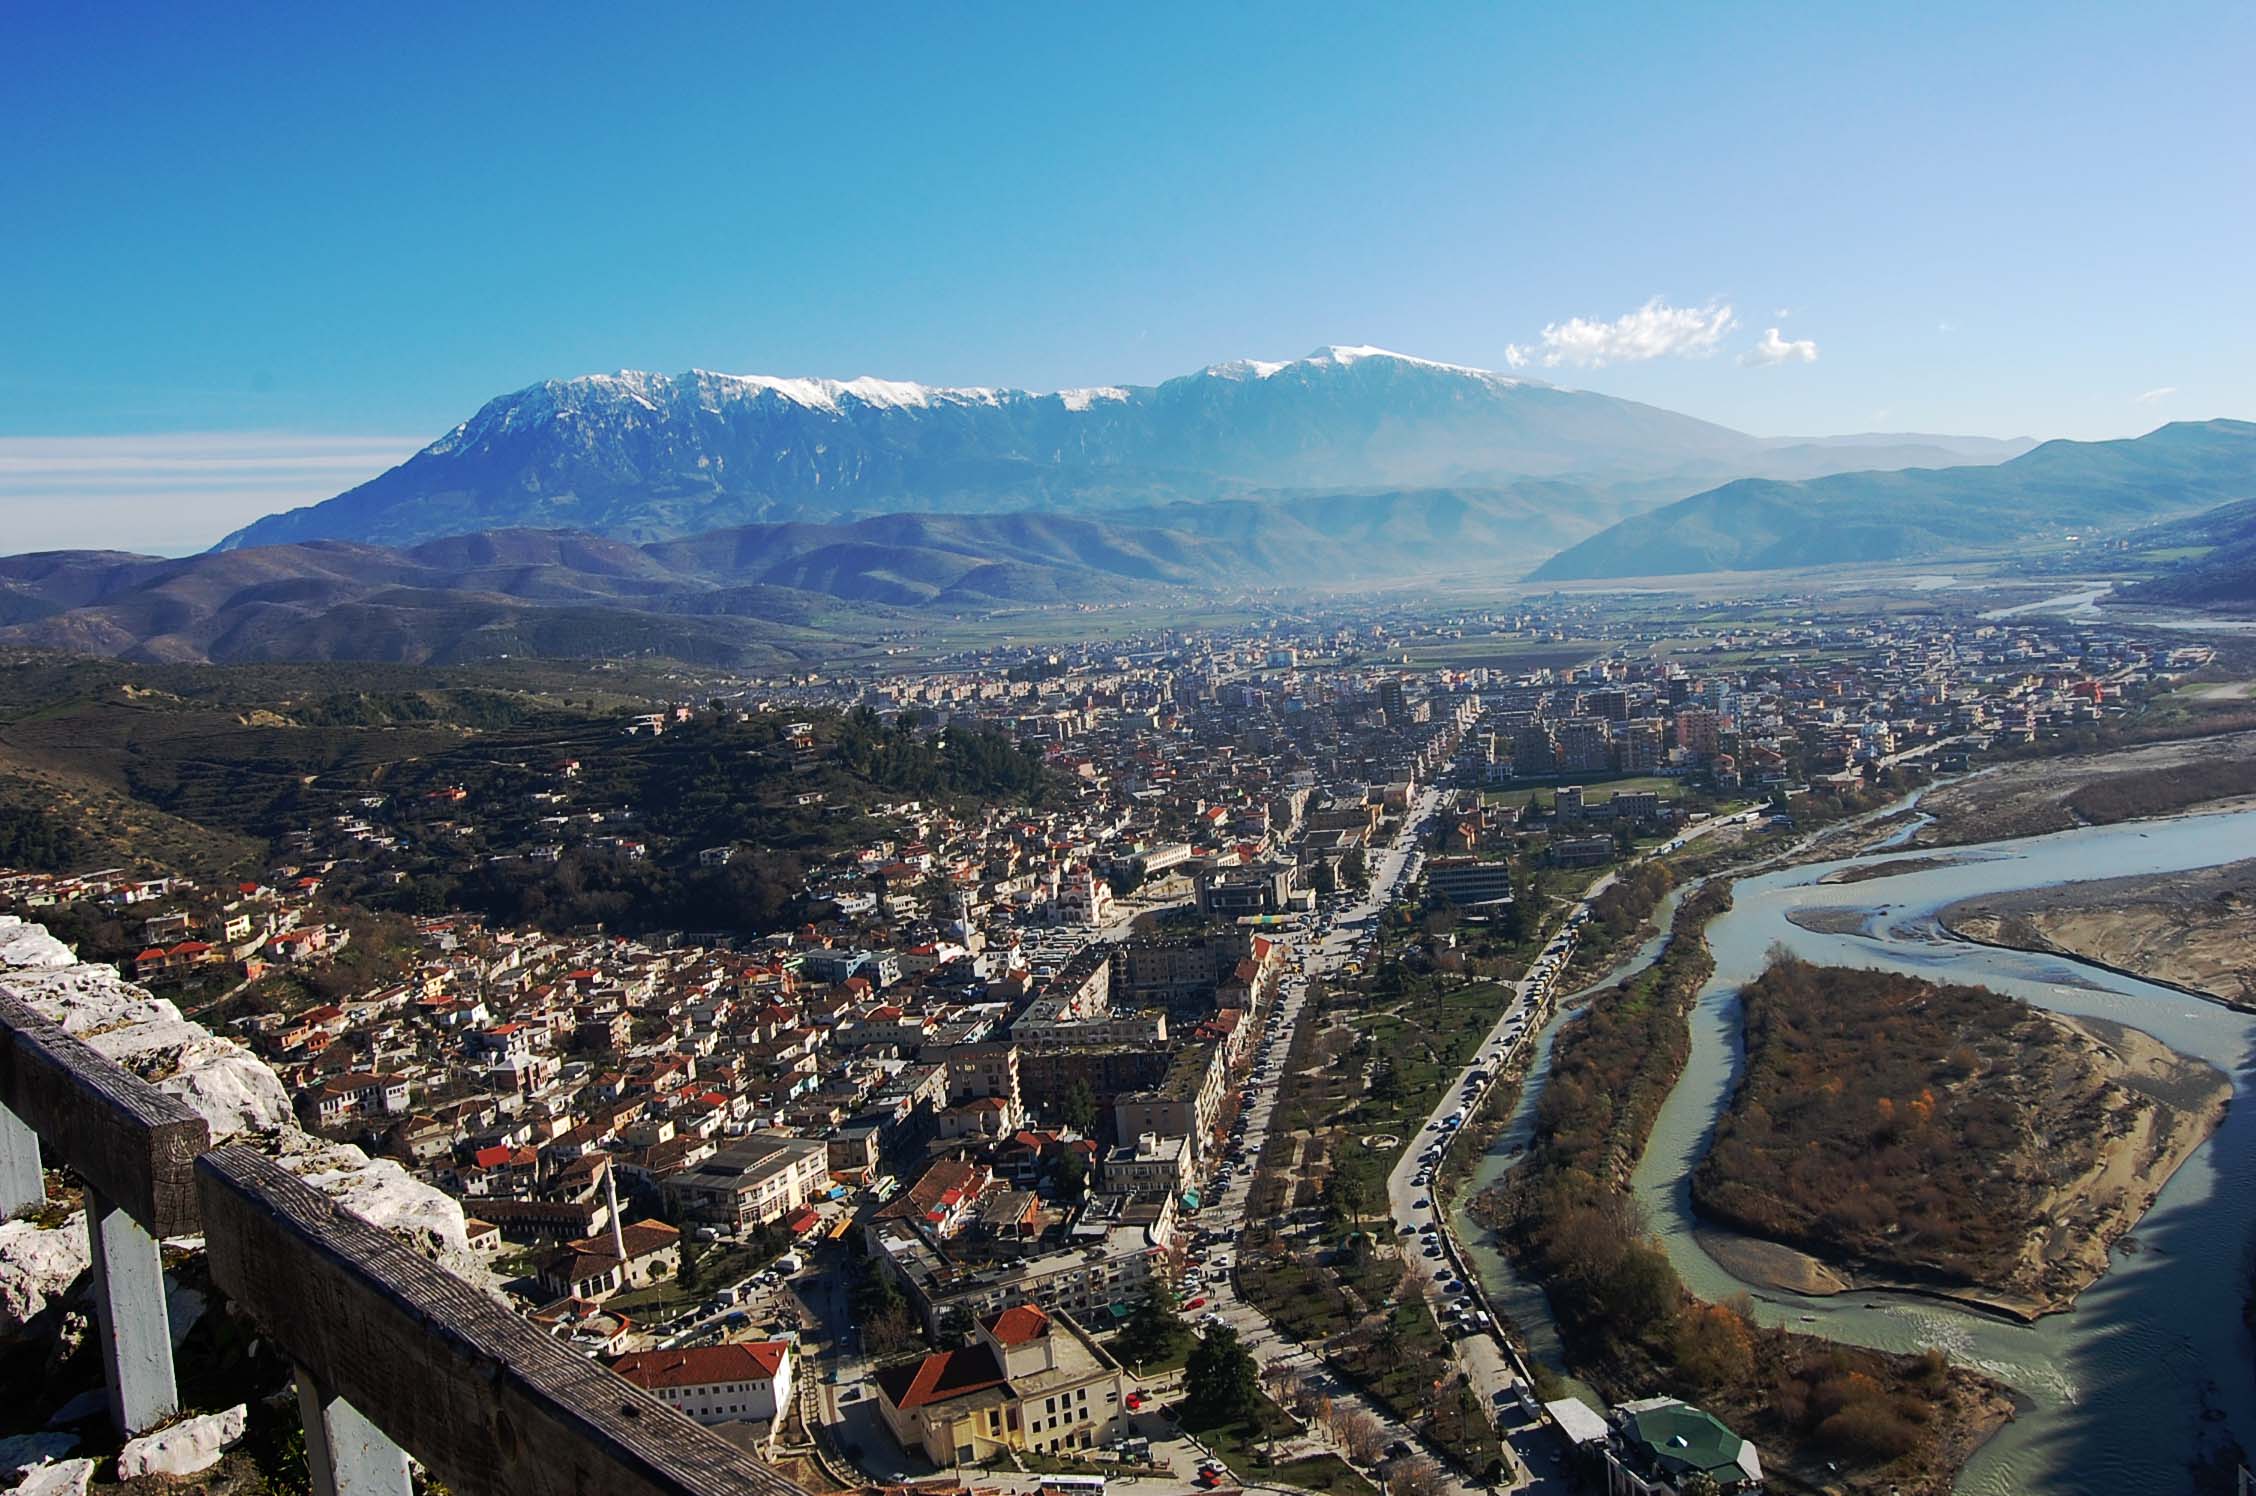 an aerial view of a city surrounded by mountains